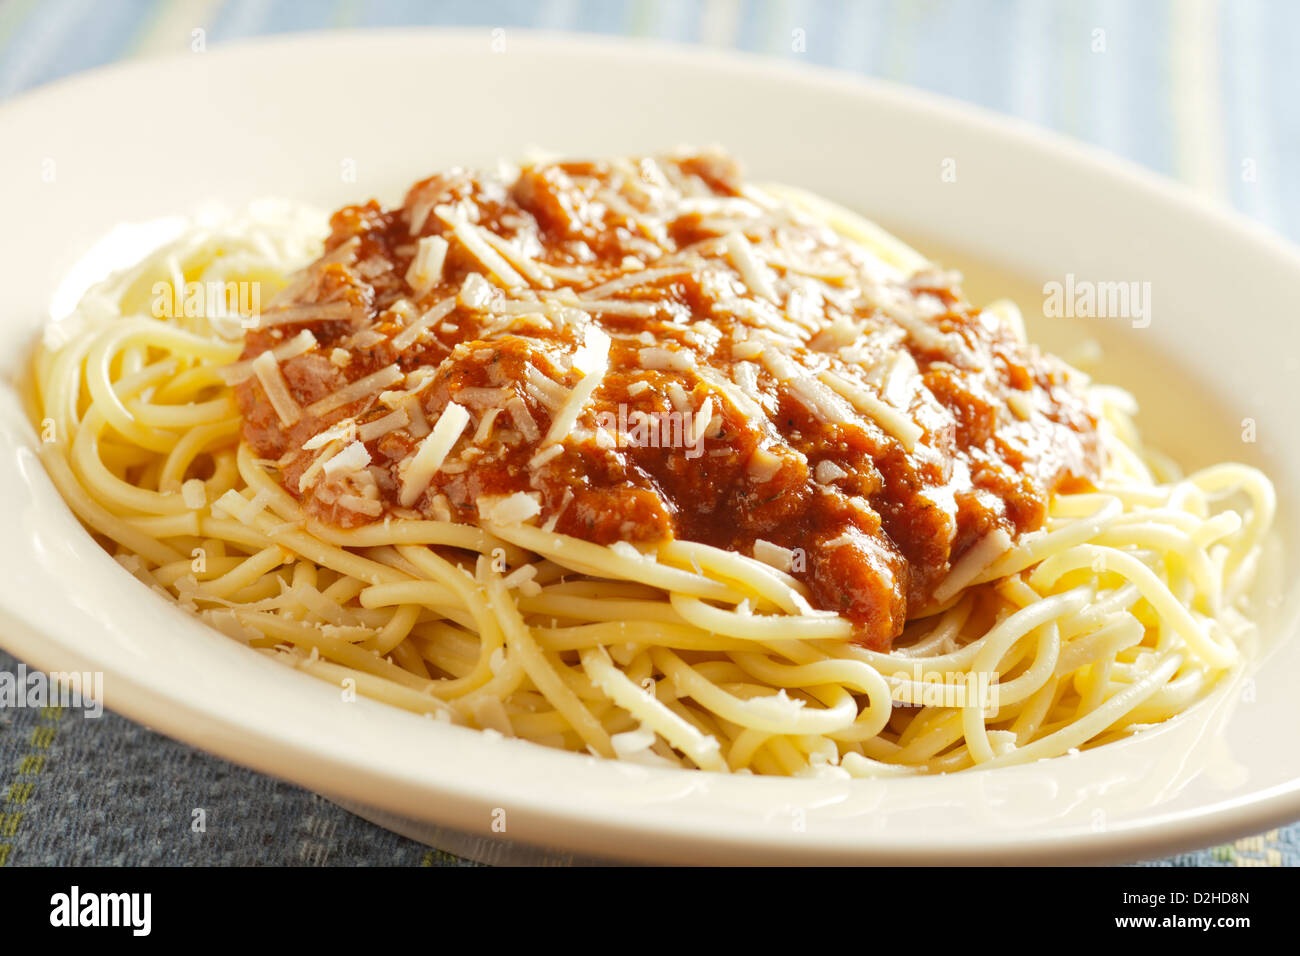 Spaghetti With Meat Sauce American Style Stock Photo